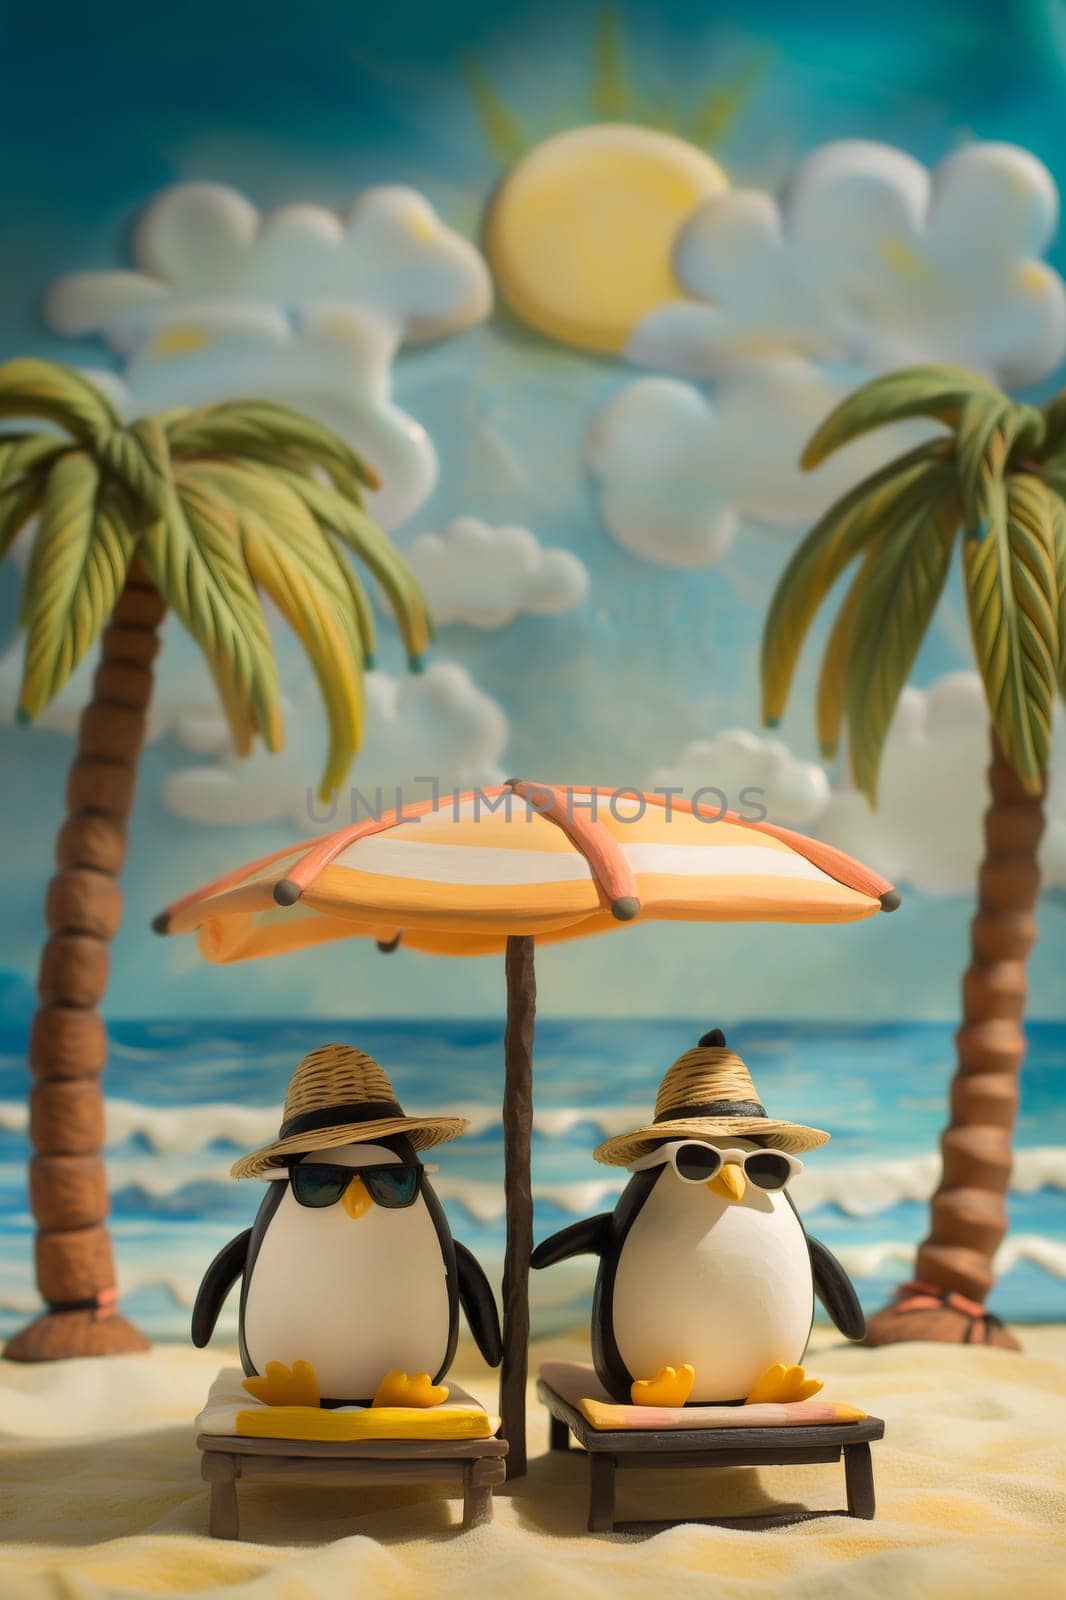 Two small plasticine penguins are sitting on sun loungers under an umbrella on the sandy seashore among palm trees, close-up side view.